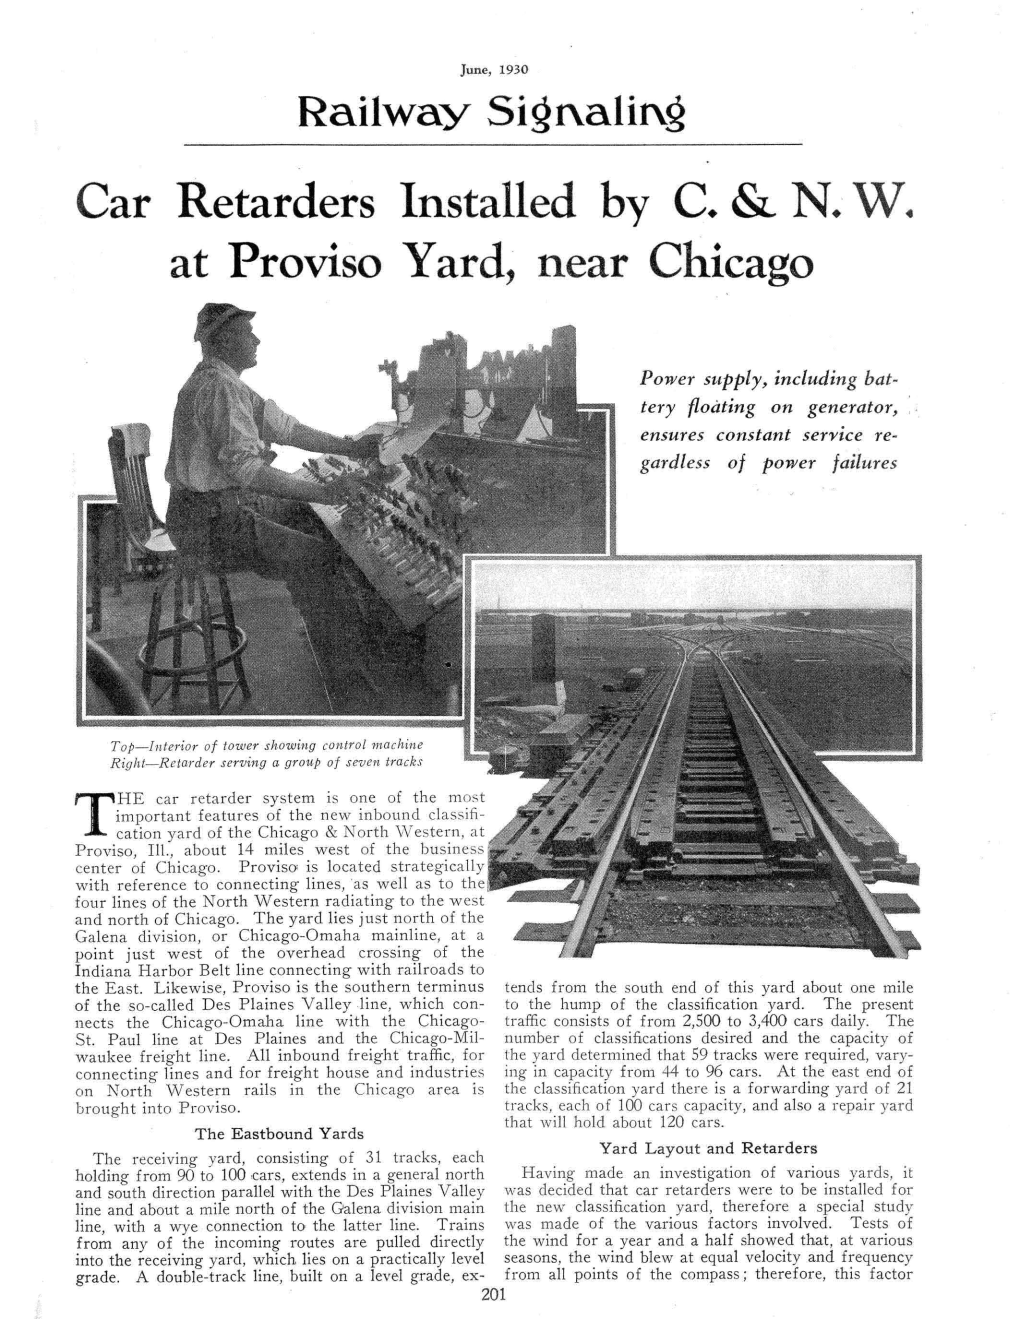 Car Retarders Installed by C&NW at Proviso Yard, Near Chicago